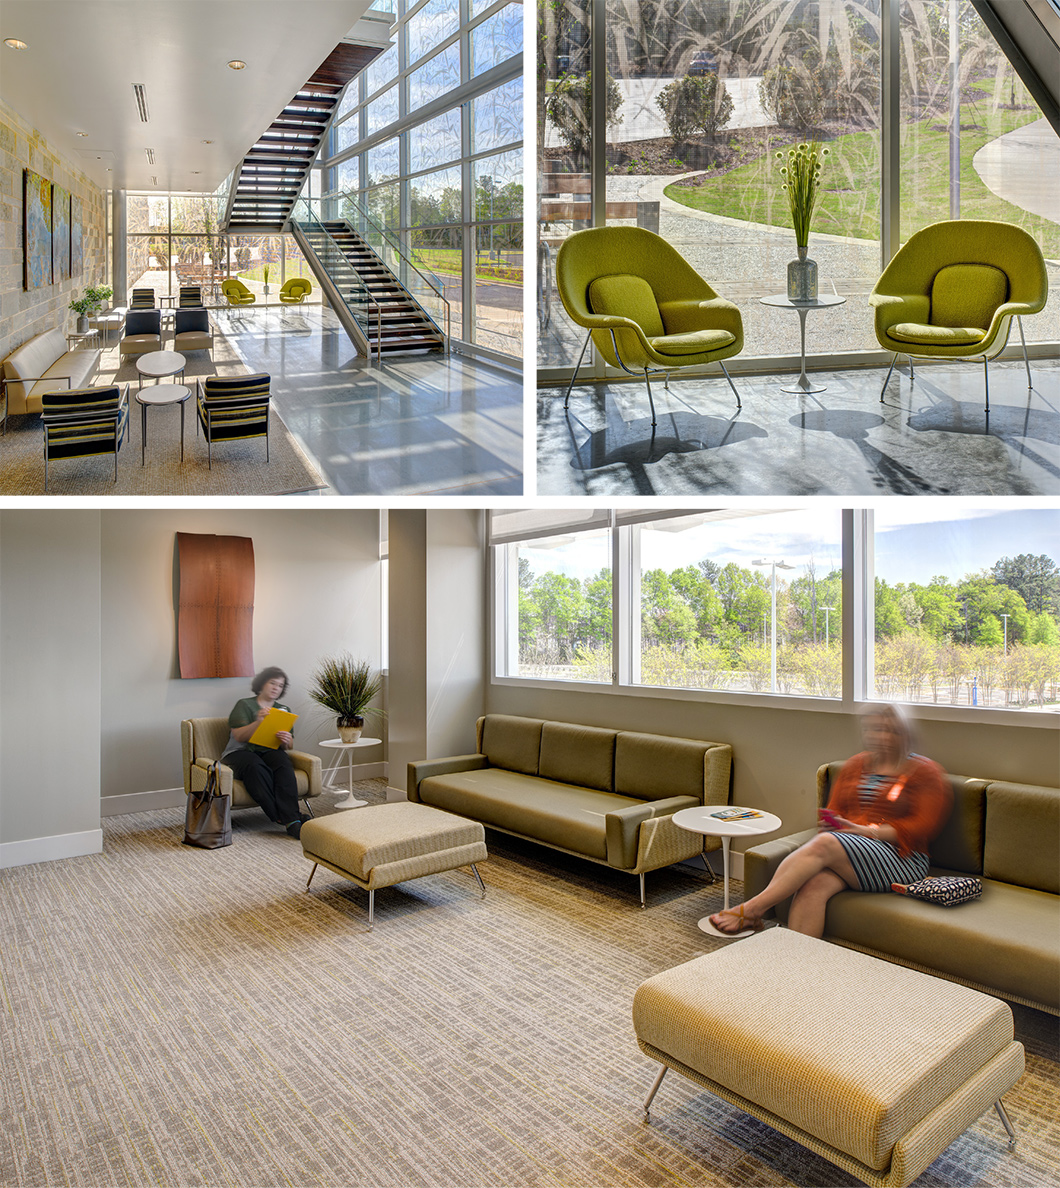 Top Left: An attractive, light-filled lounge sits under stairs to the second floor right at the entrance to the St. Francis Cancer Center. Soothing natural colors and a modern, uncluttered space offer serenity to visitors. Featured: Saarinen Womb Chairs | Top Right: Visitors awaiting pick-up near the entrance of the building can relax in a comfortable seating area. The green fabric on the chairs and flowers on the side table pick up the grasses outside the window. Featured: Saarinen Womb Chairs, Saarinen Pedestal Side Tables | Bottom: Large windows in a patient waiting area offer views of surrounding mountains and natural light, while soothing beige tones create a calming atmosphere. Featured: Architecture & Associates Sofas & Ottomans, Saarinen Side Tables